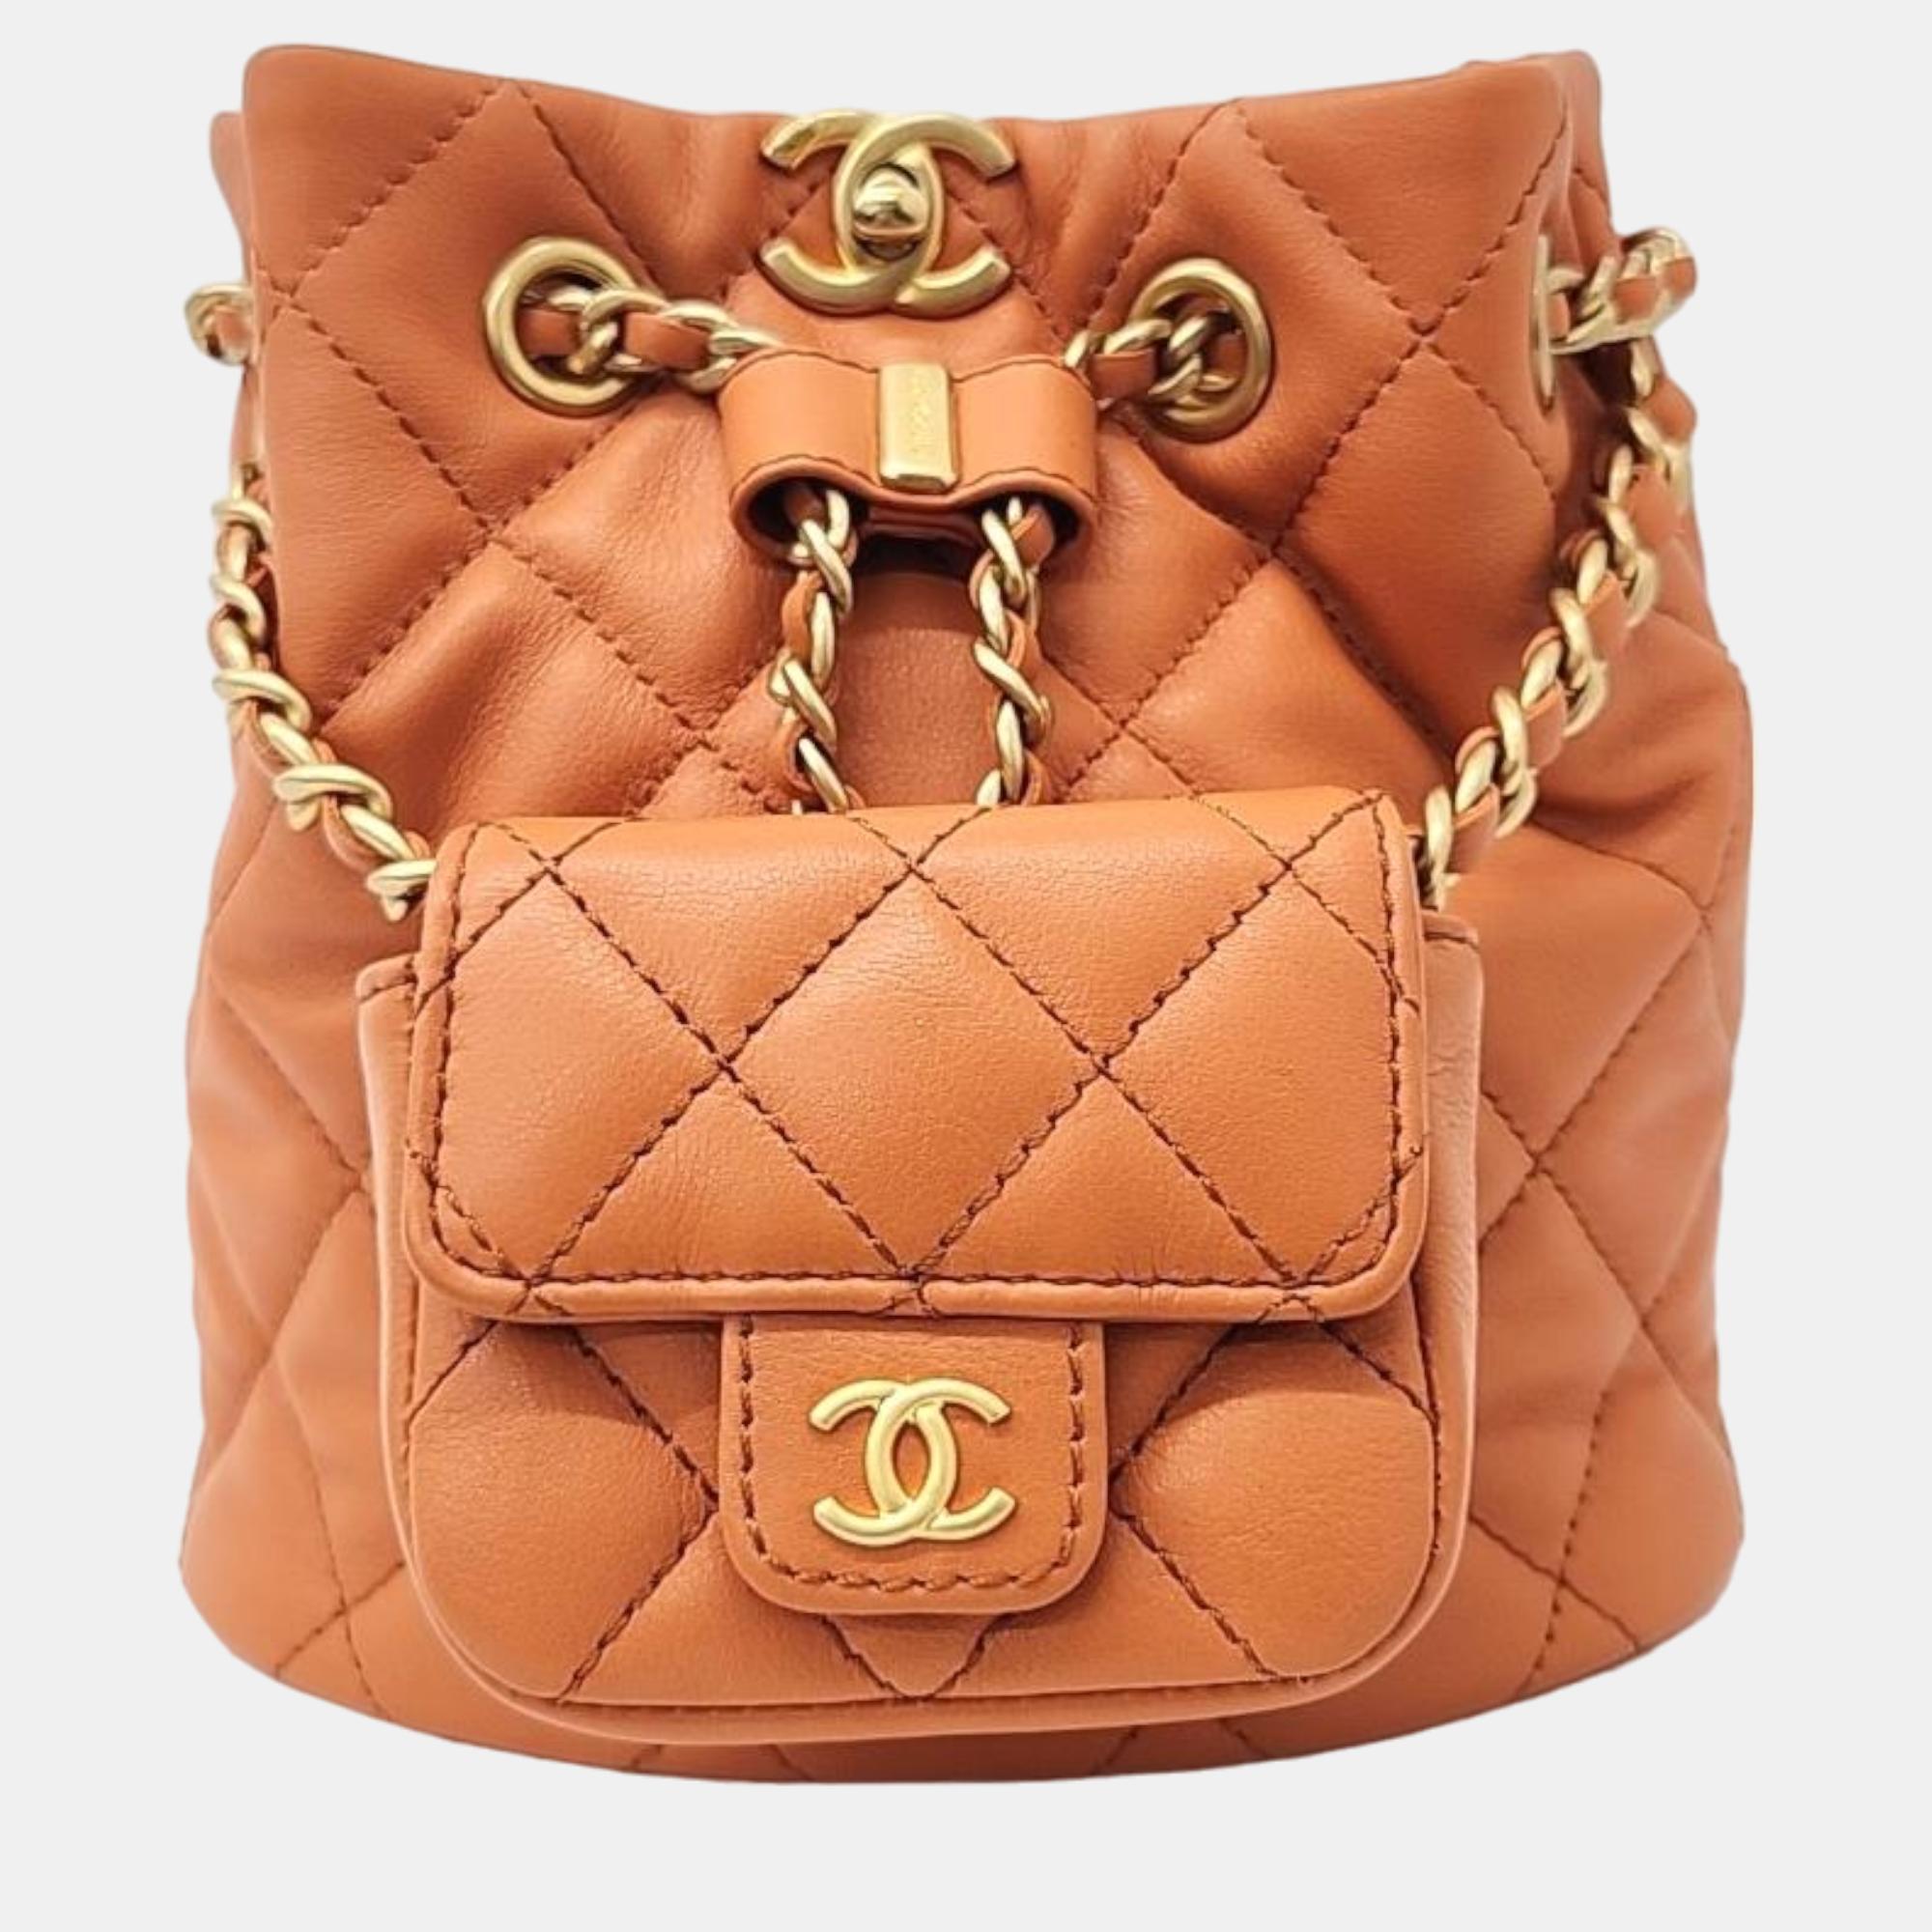 Chanel orange/brown leather small backpack